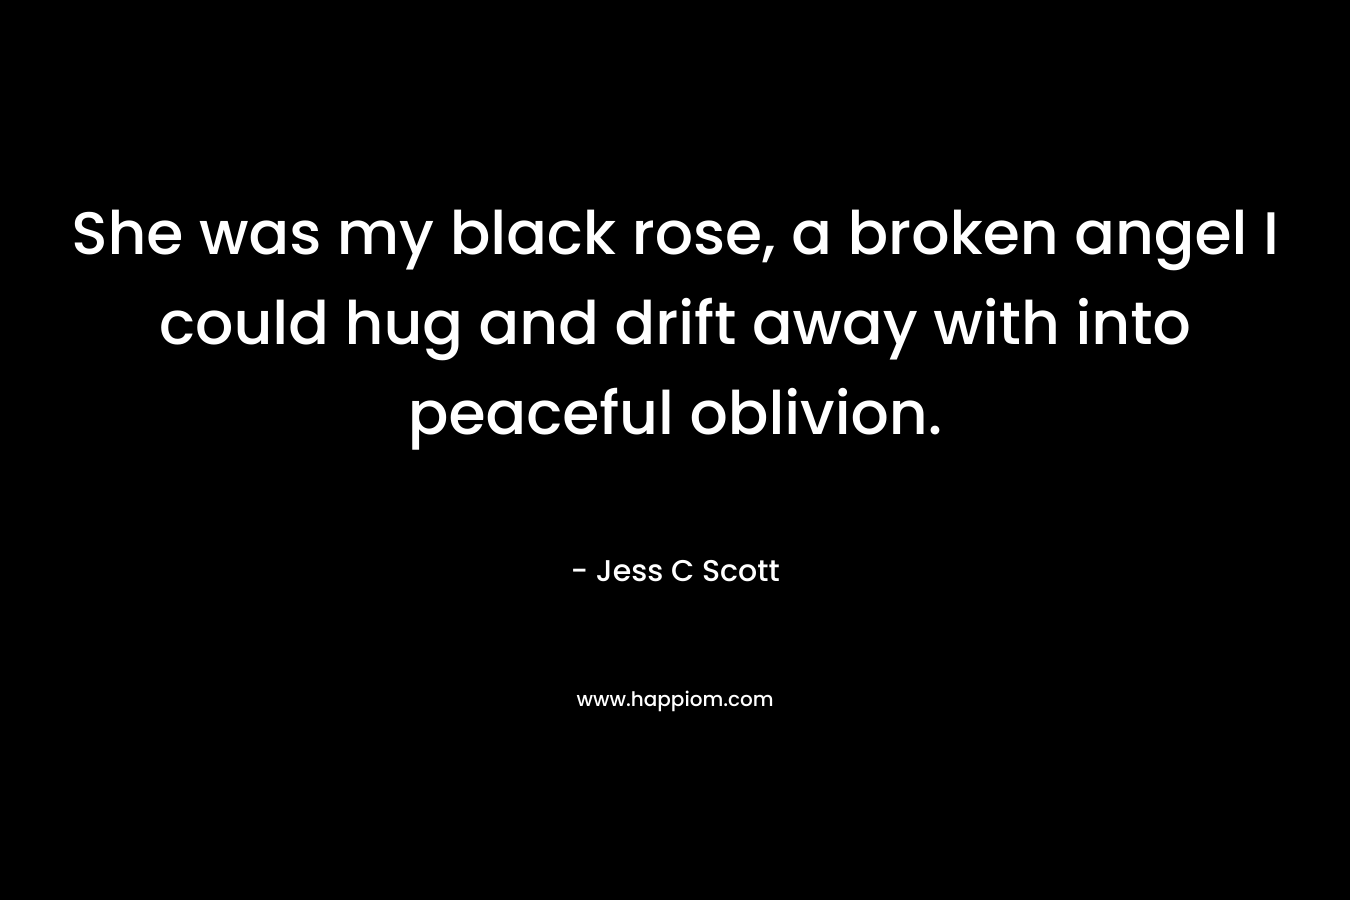 She was my black rose, a broken angel I could hug and drift away with into peaceful oblivion. – Jess C Scott